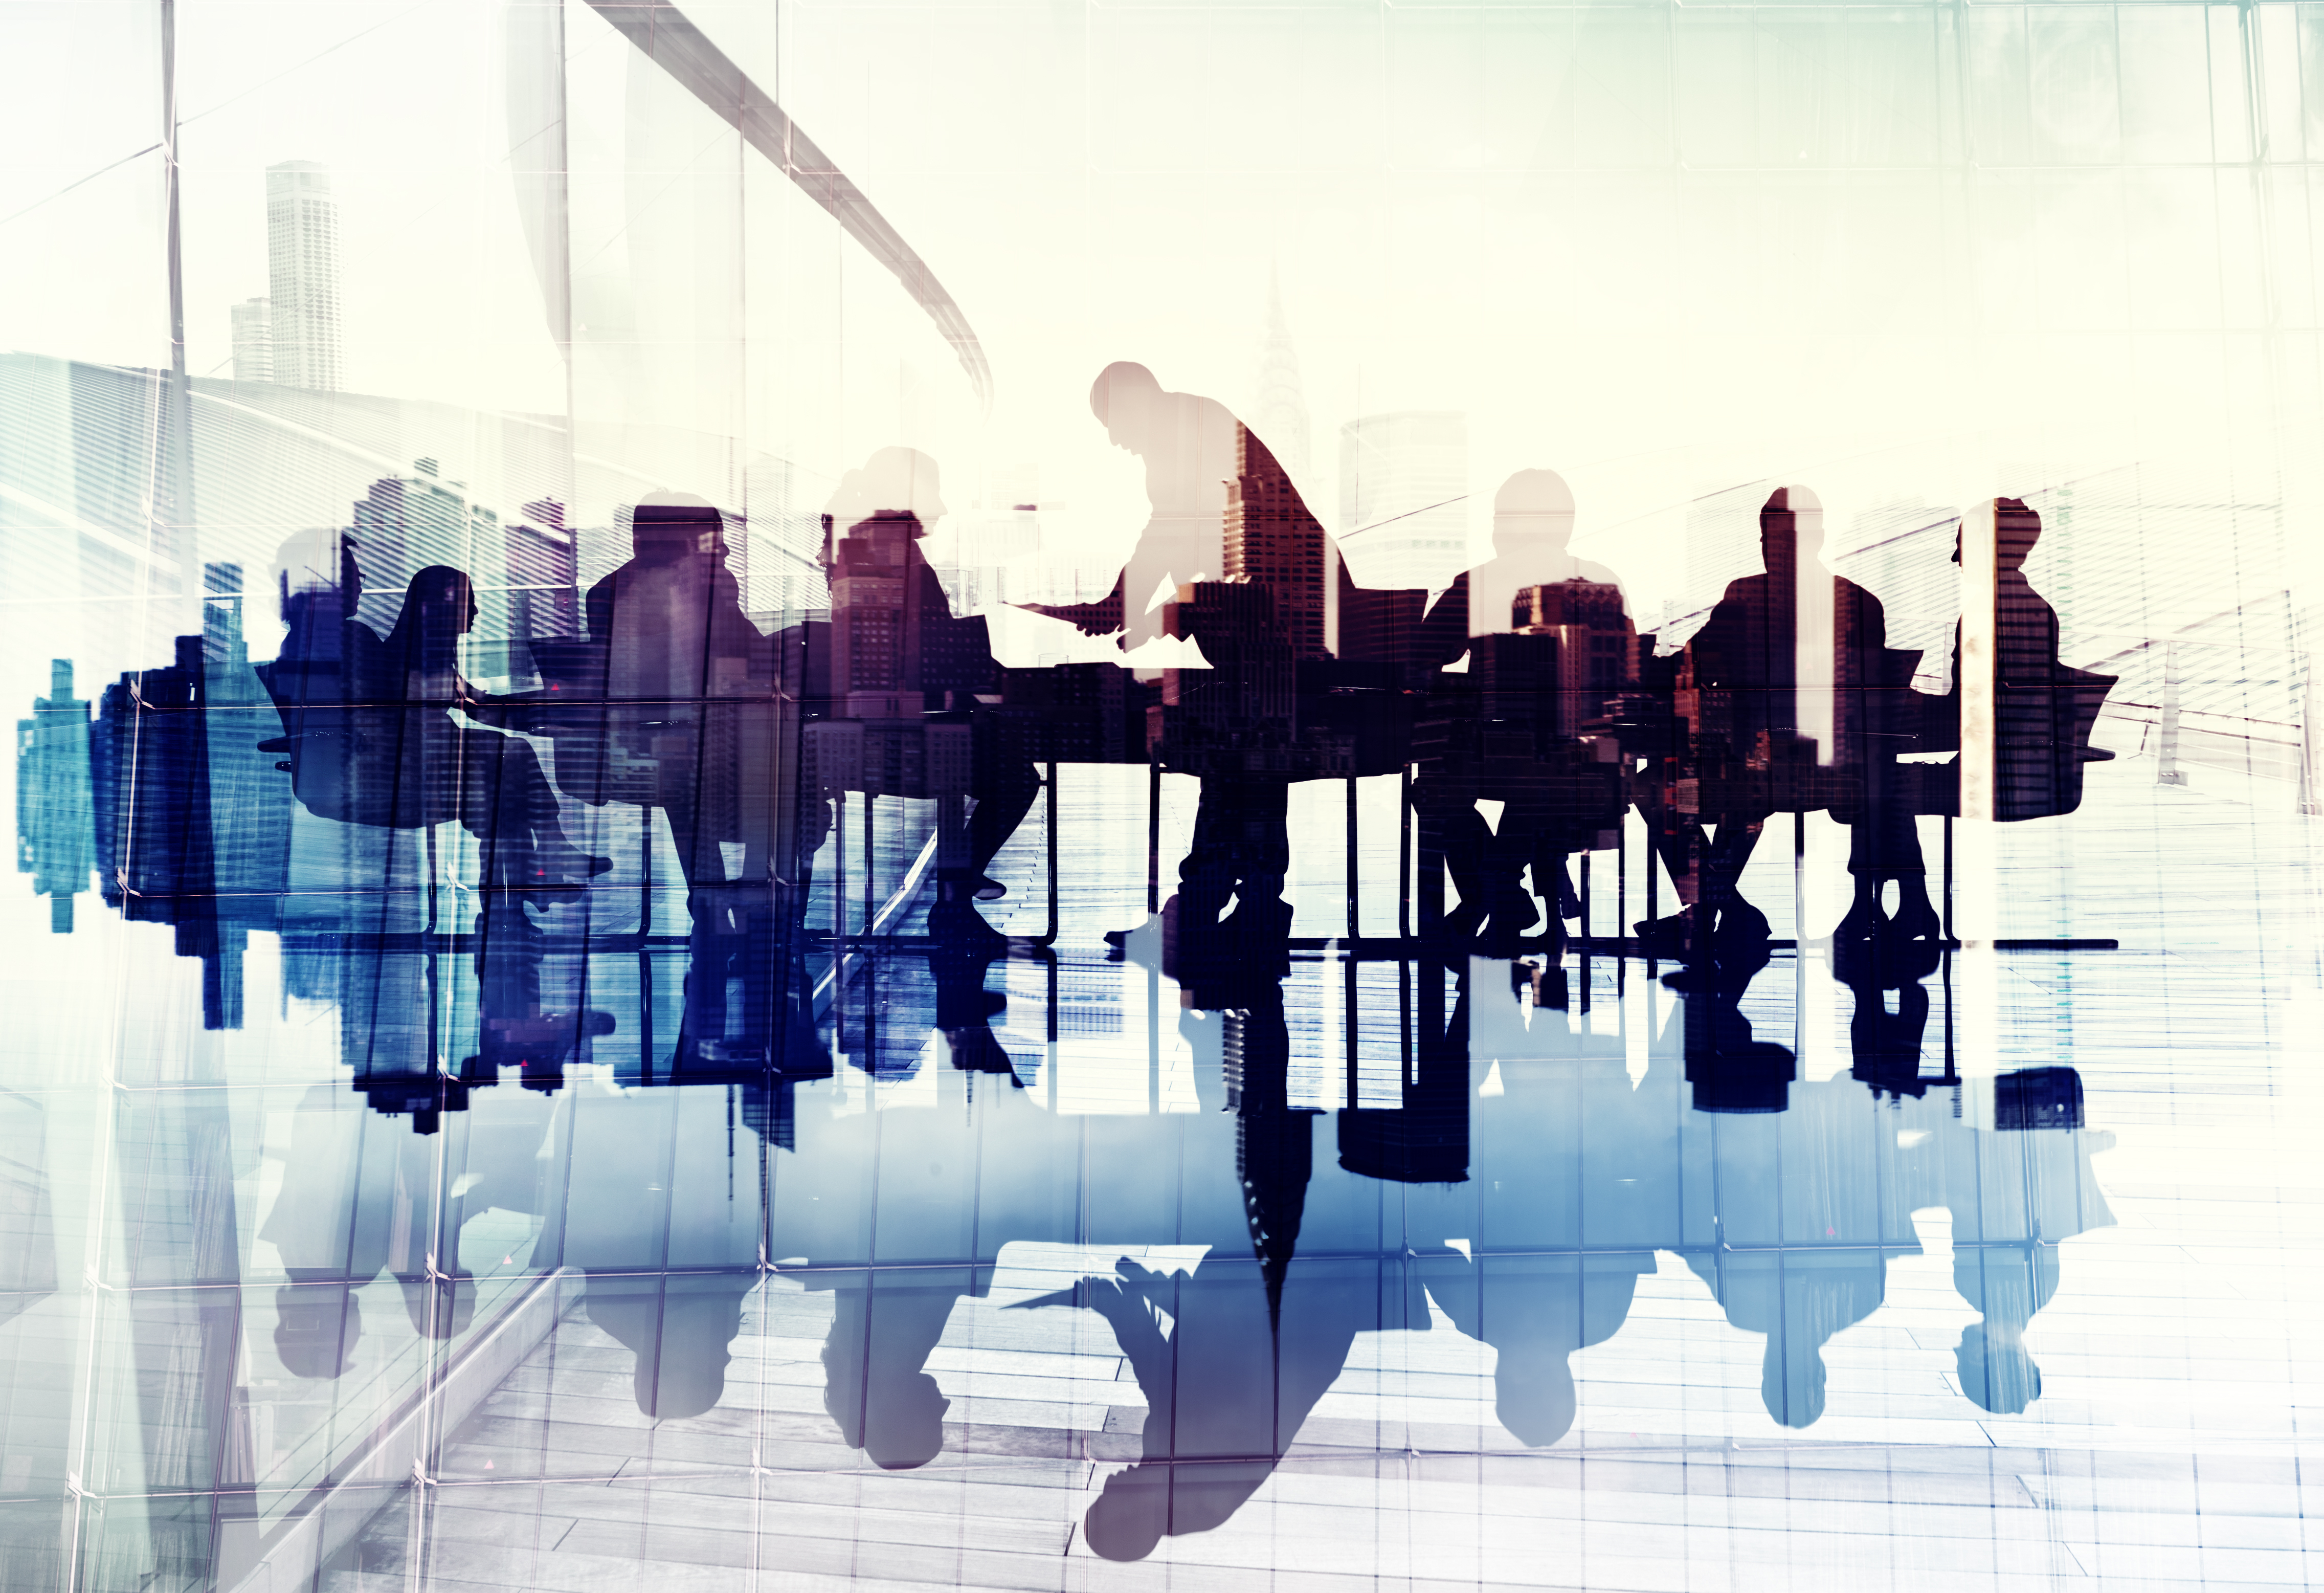 Abstract image of business people's silhouettes in a meeting